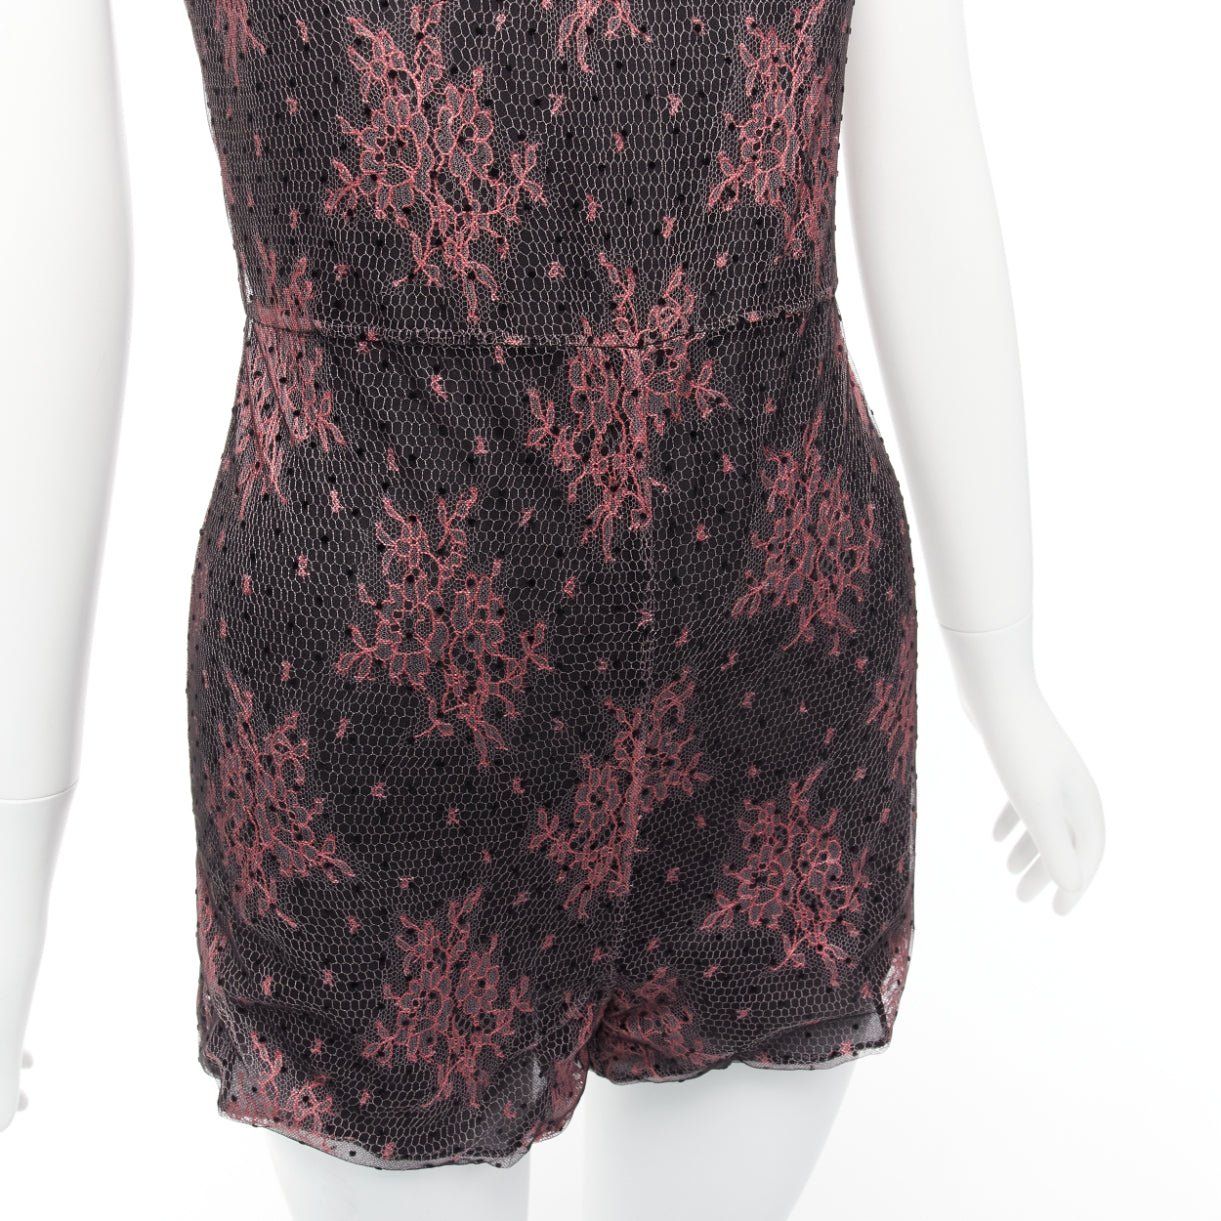 Dior CHRISTIAN DIOR black pink intricate lace overlay playsuit romper FR34 XS Size 26" / US 2 / IT 38 - 7 Thumbnail